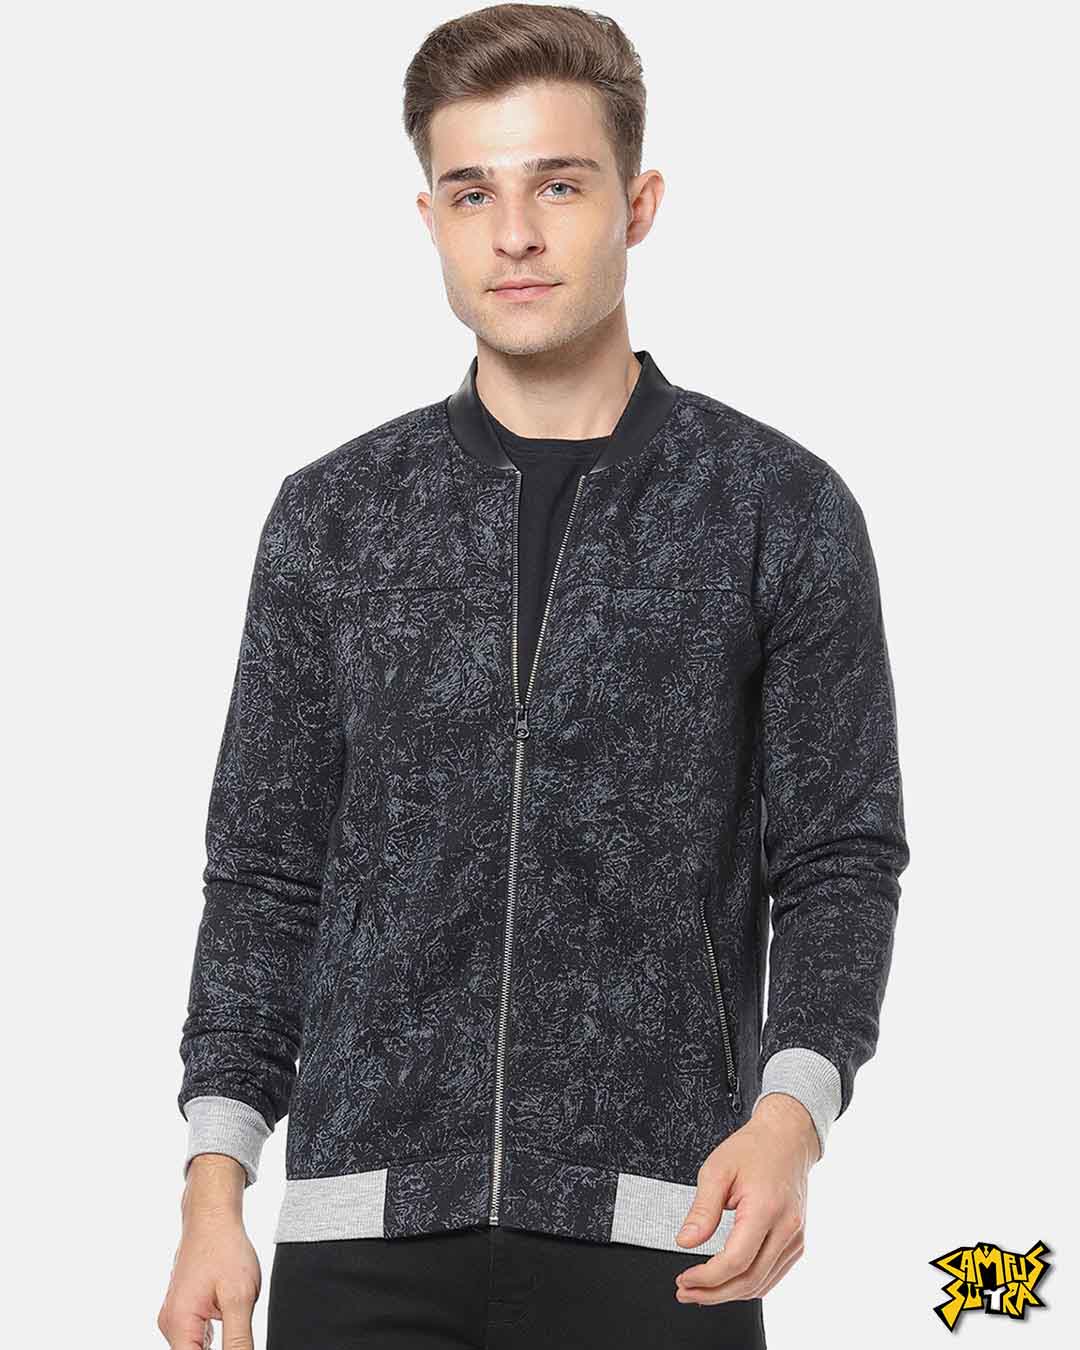 Campus Sutra Men Graphic Design Stylish Casual Jacket